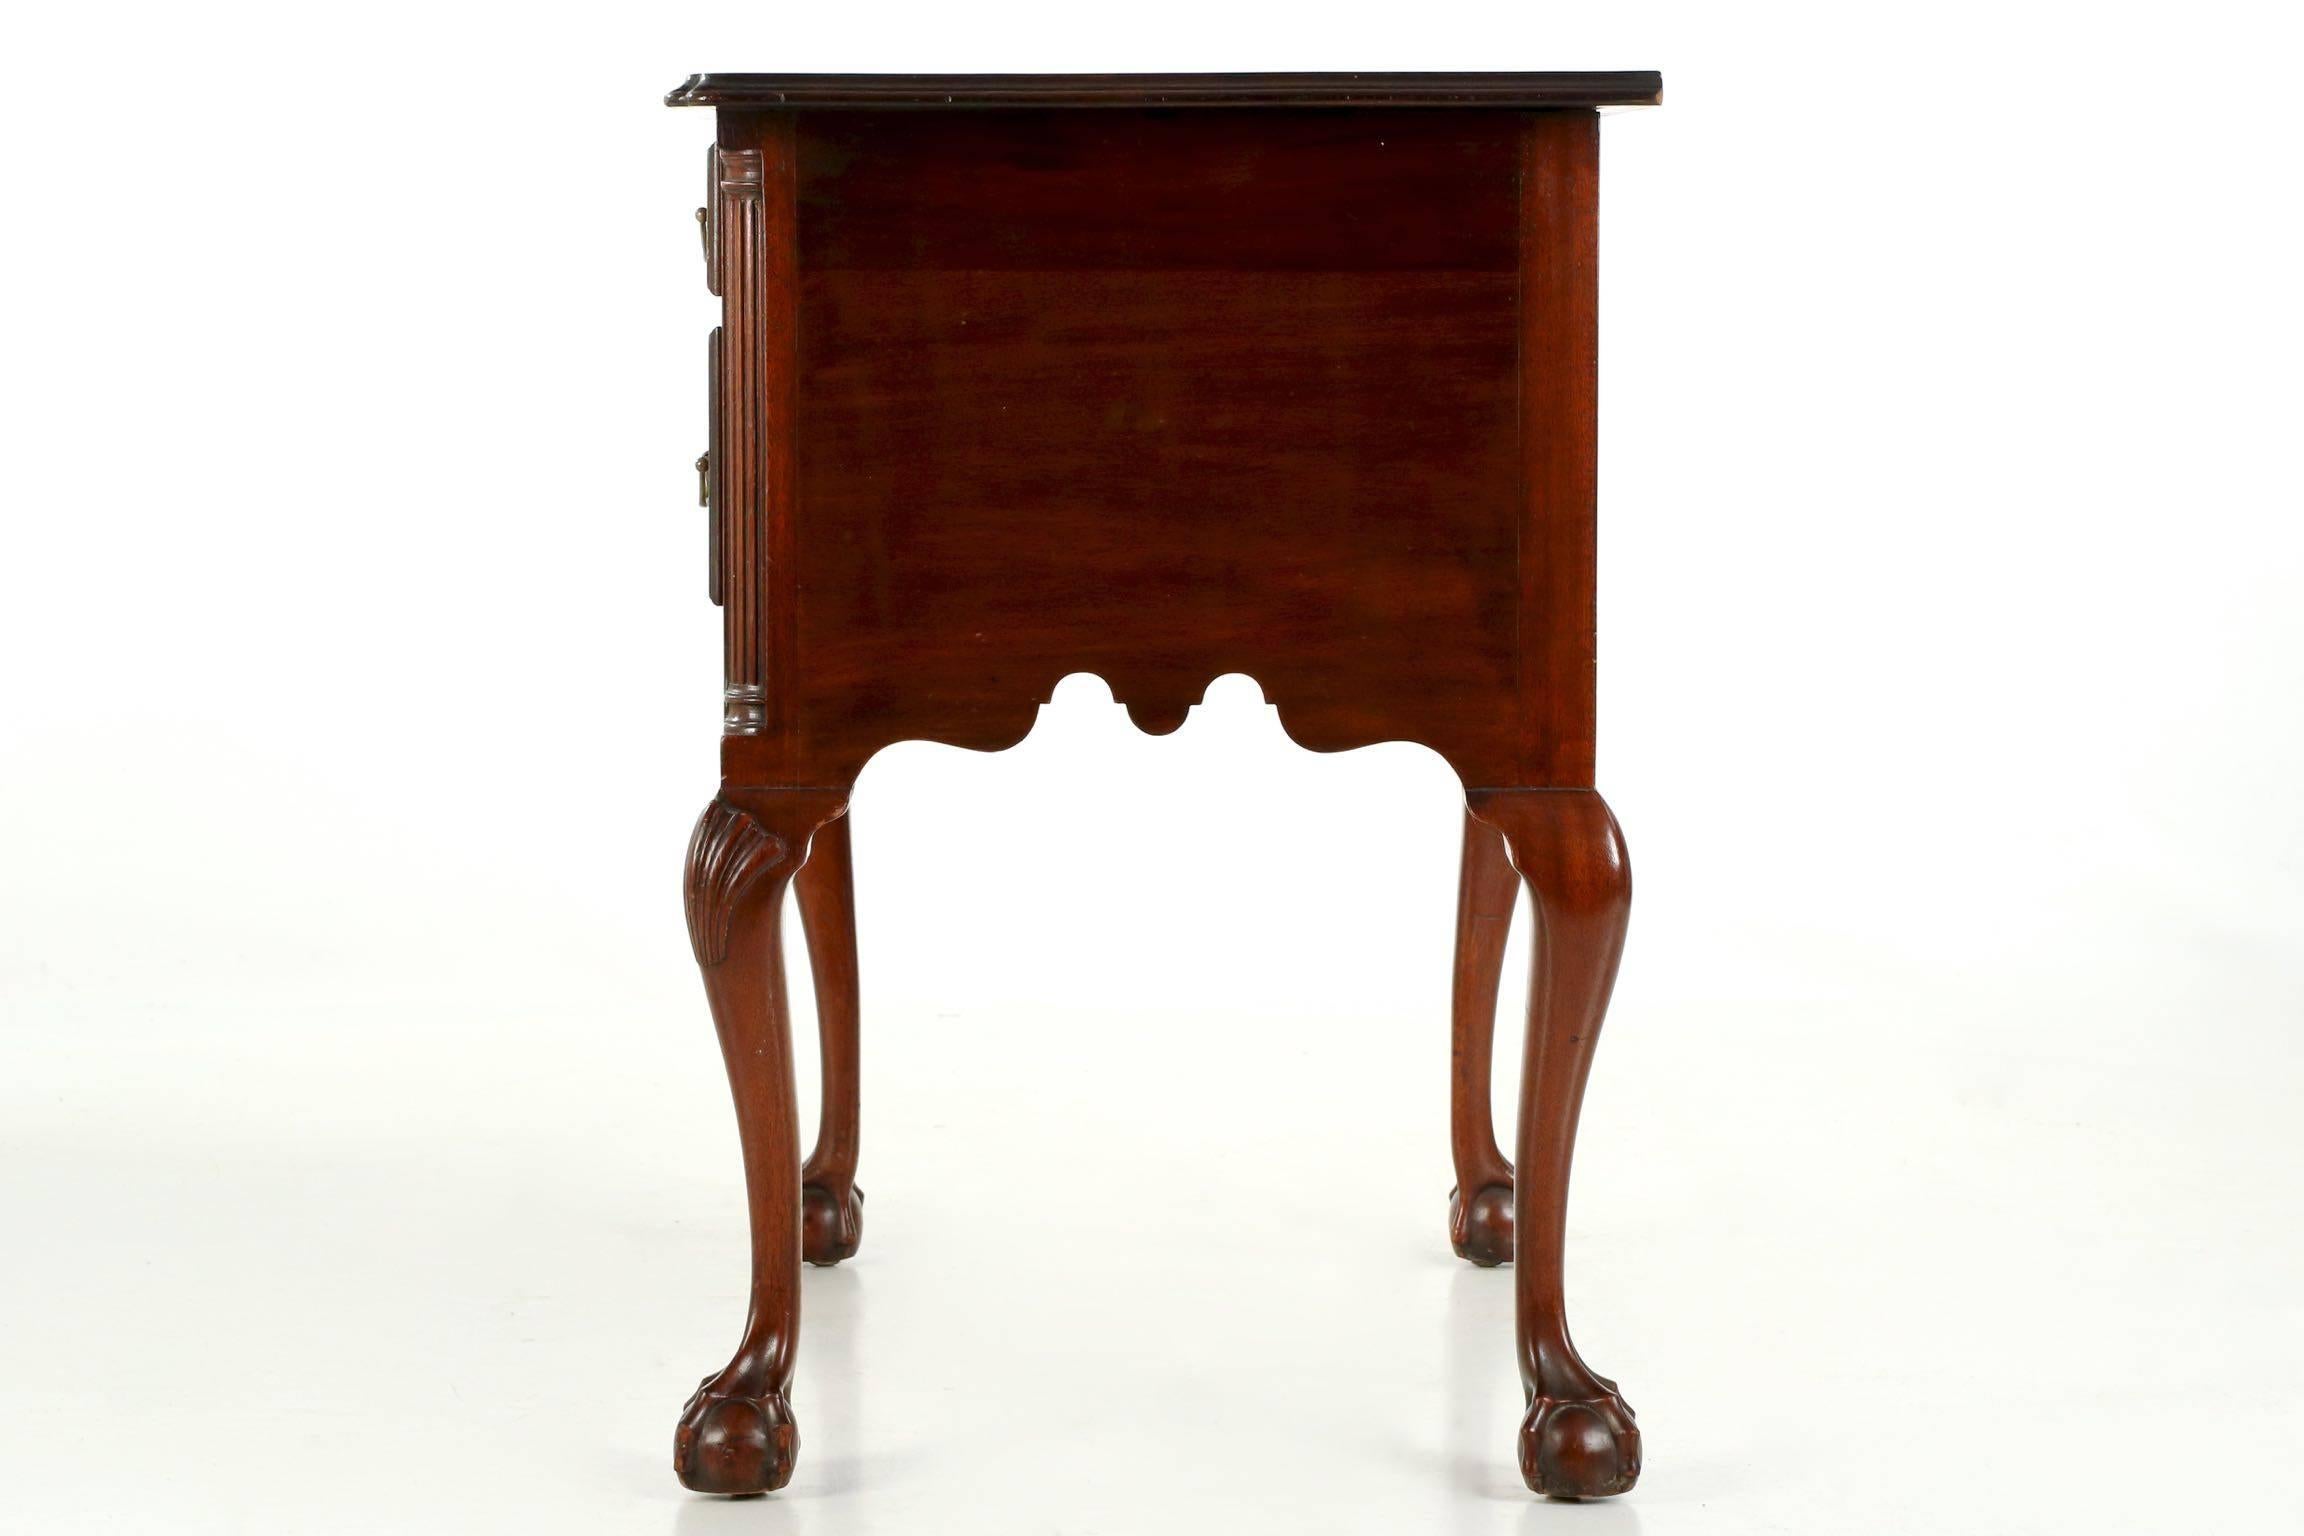 Hand-Carved American Chippendale Style Mahogany Lowboy in the Connecticut Taste